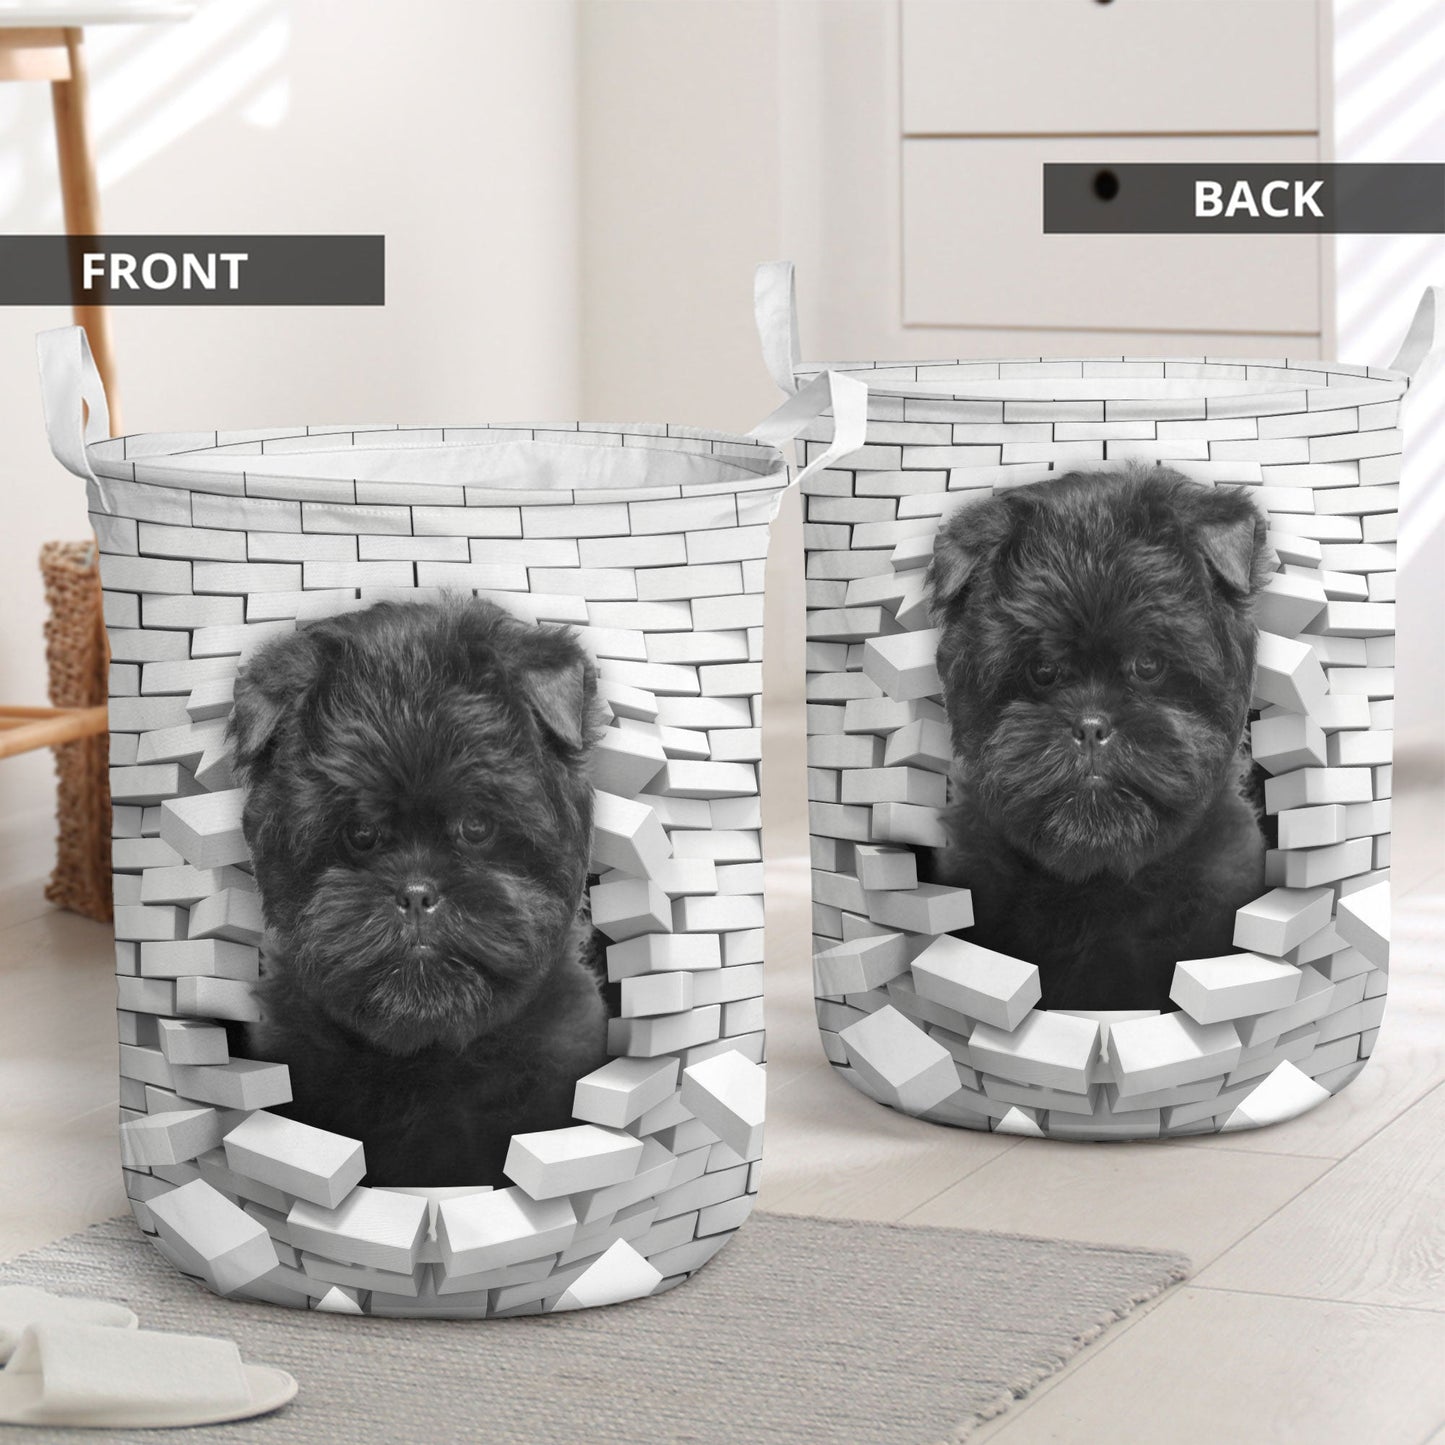 Affenpinscher In The Hole Of Wall Pattern Laundry Basket